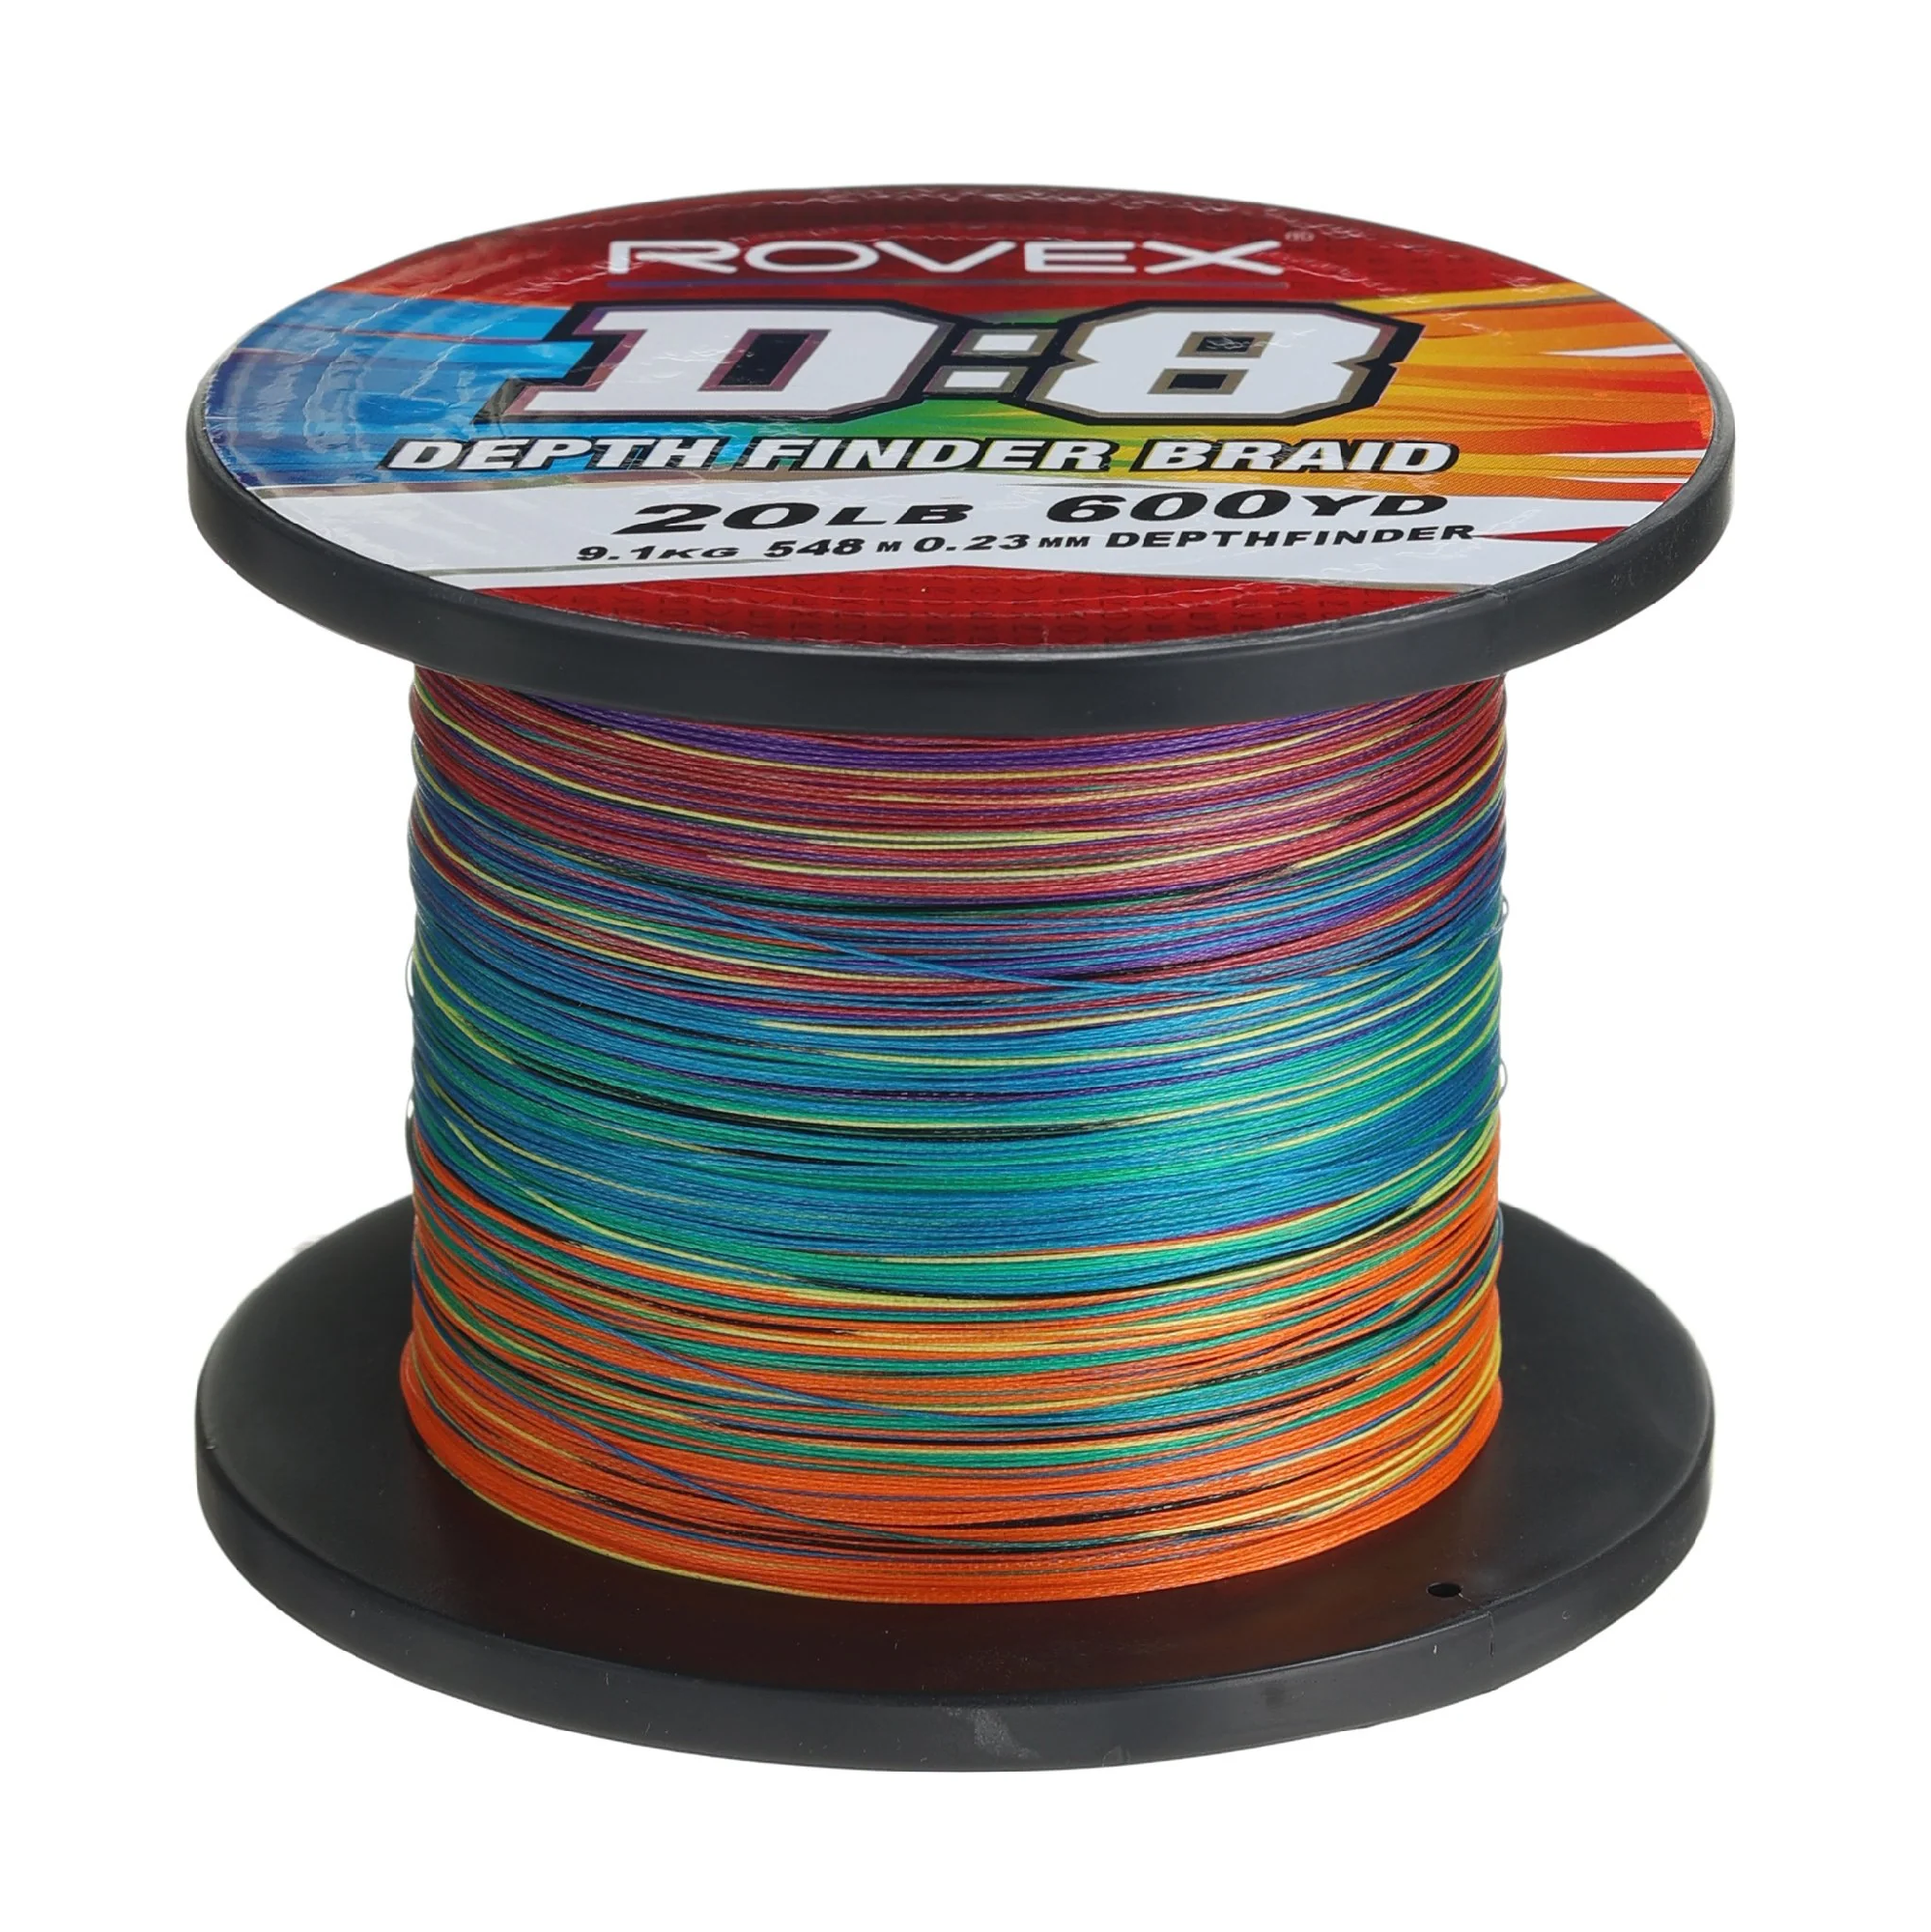 Rovex D8 Depth Finder Braided Fishing Line Multi Colour 600yds